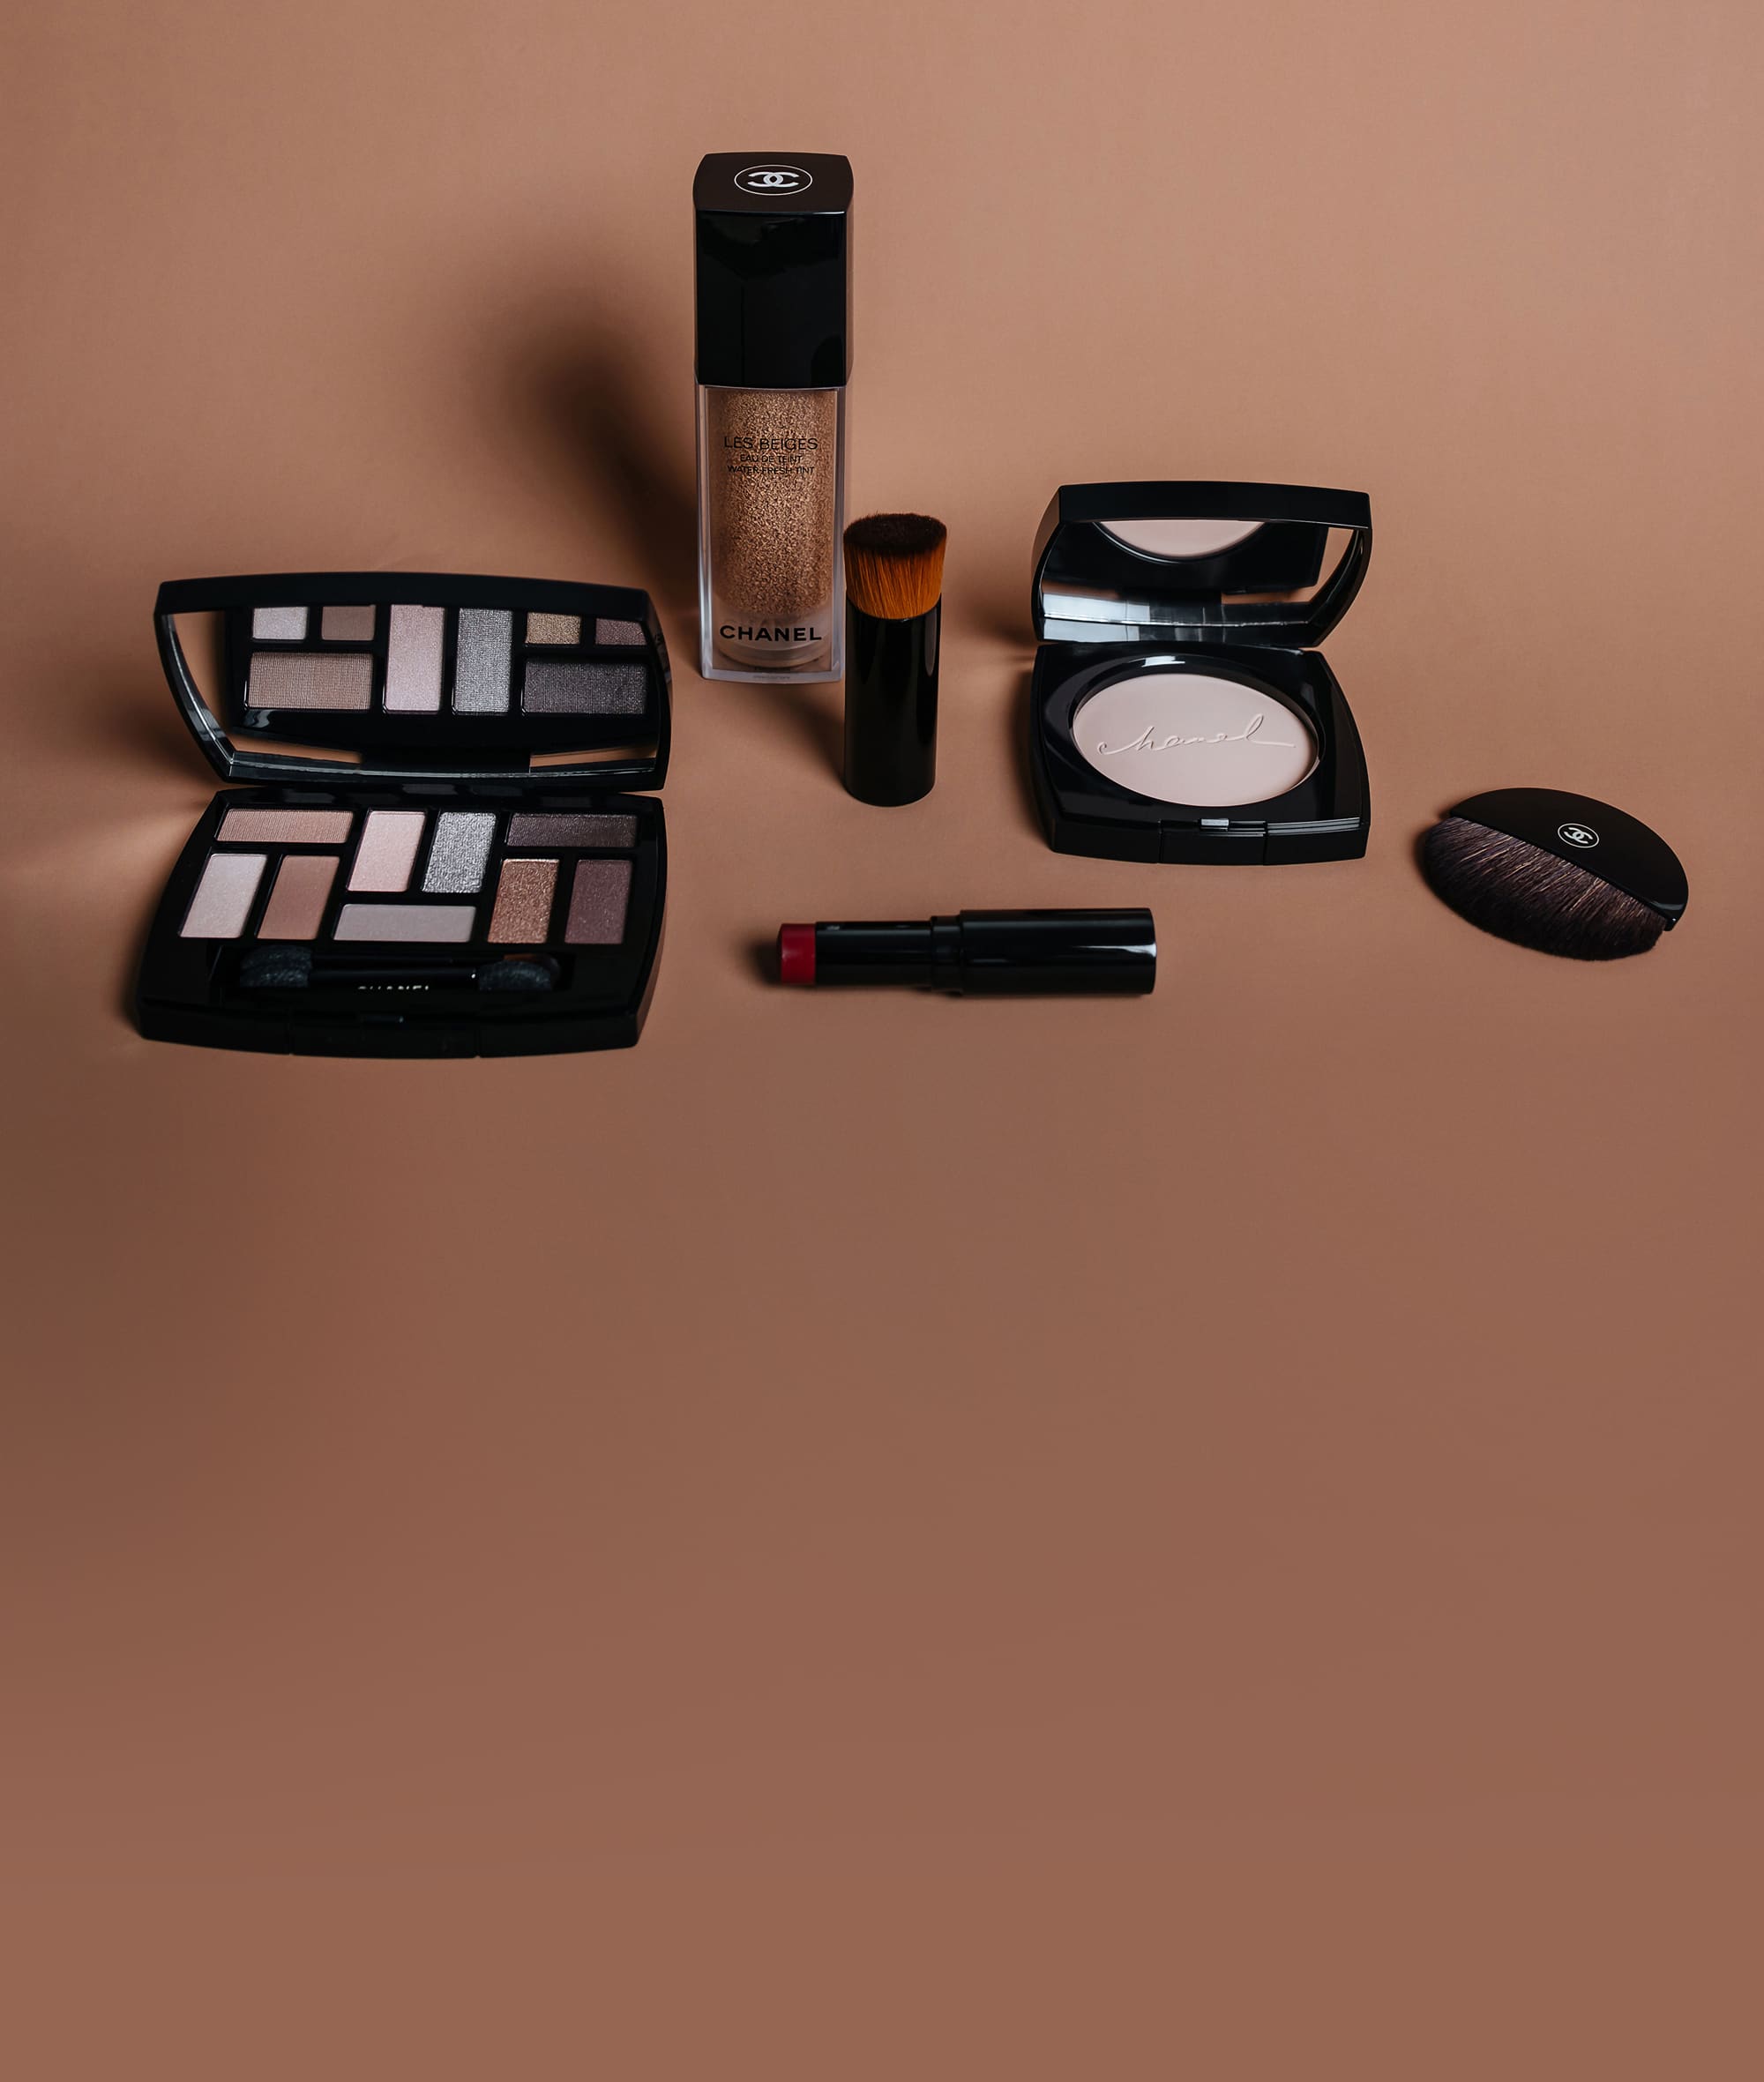 Chanel takes no-makeup makeup to the next level - Badlands Journal